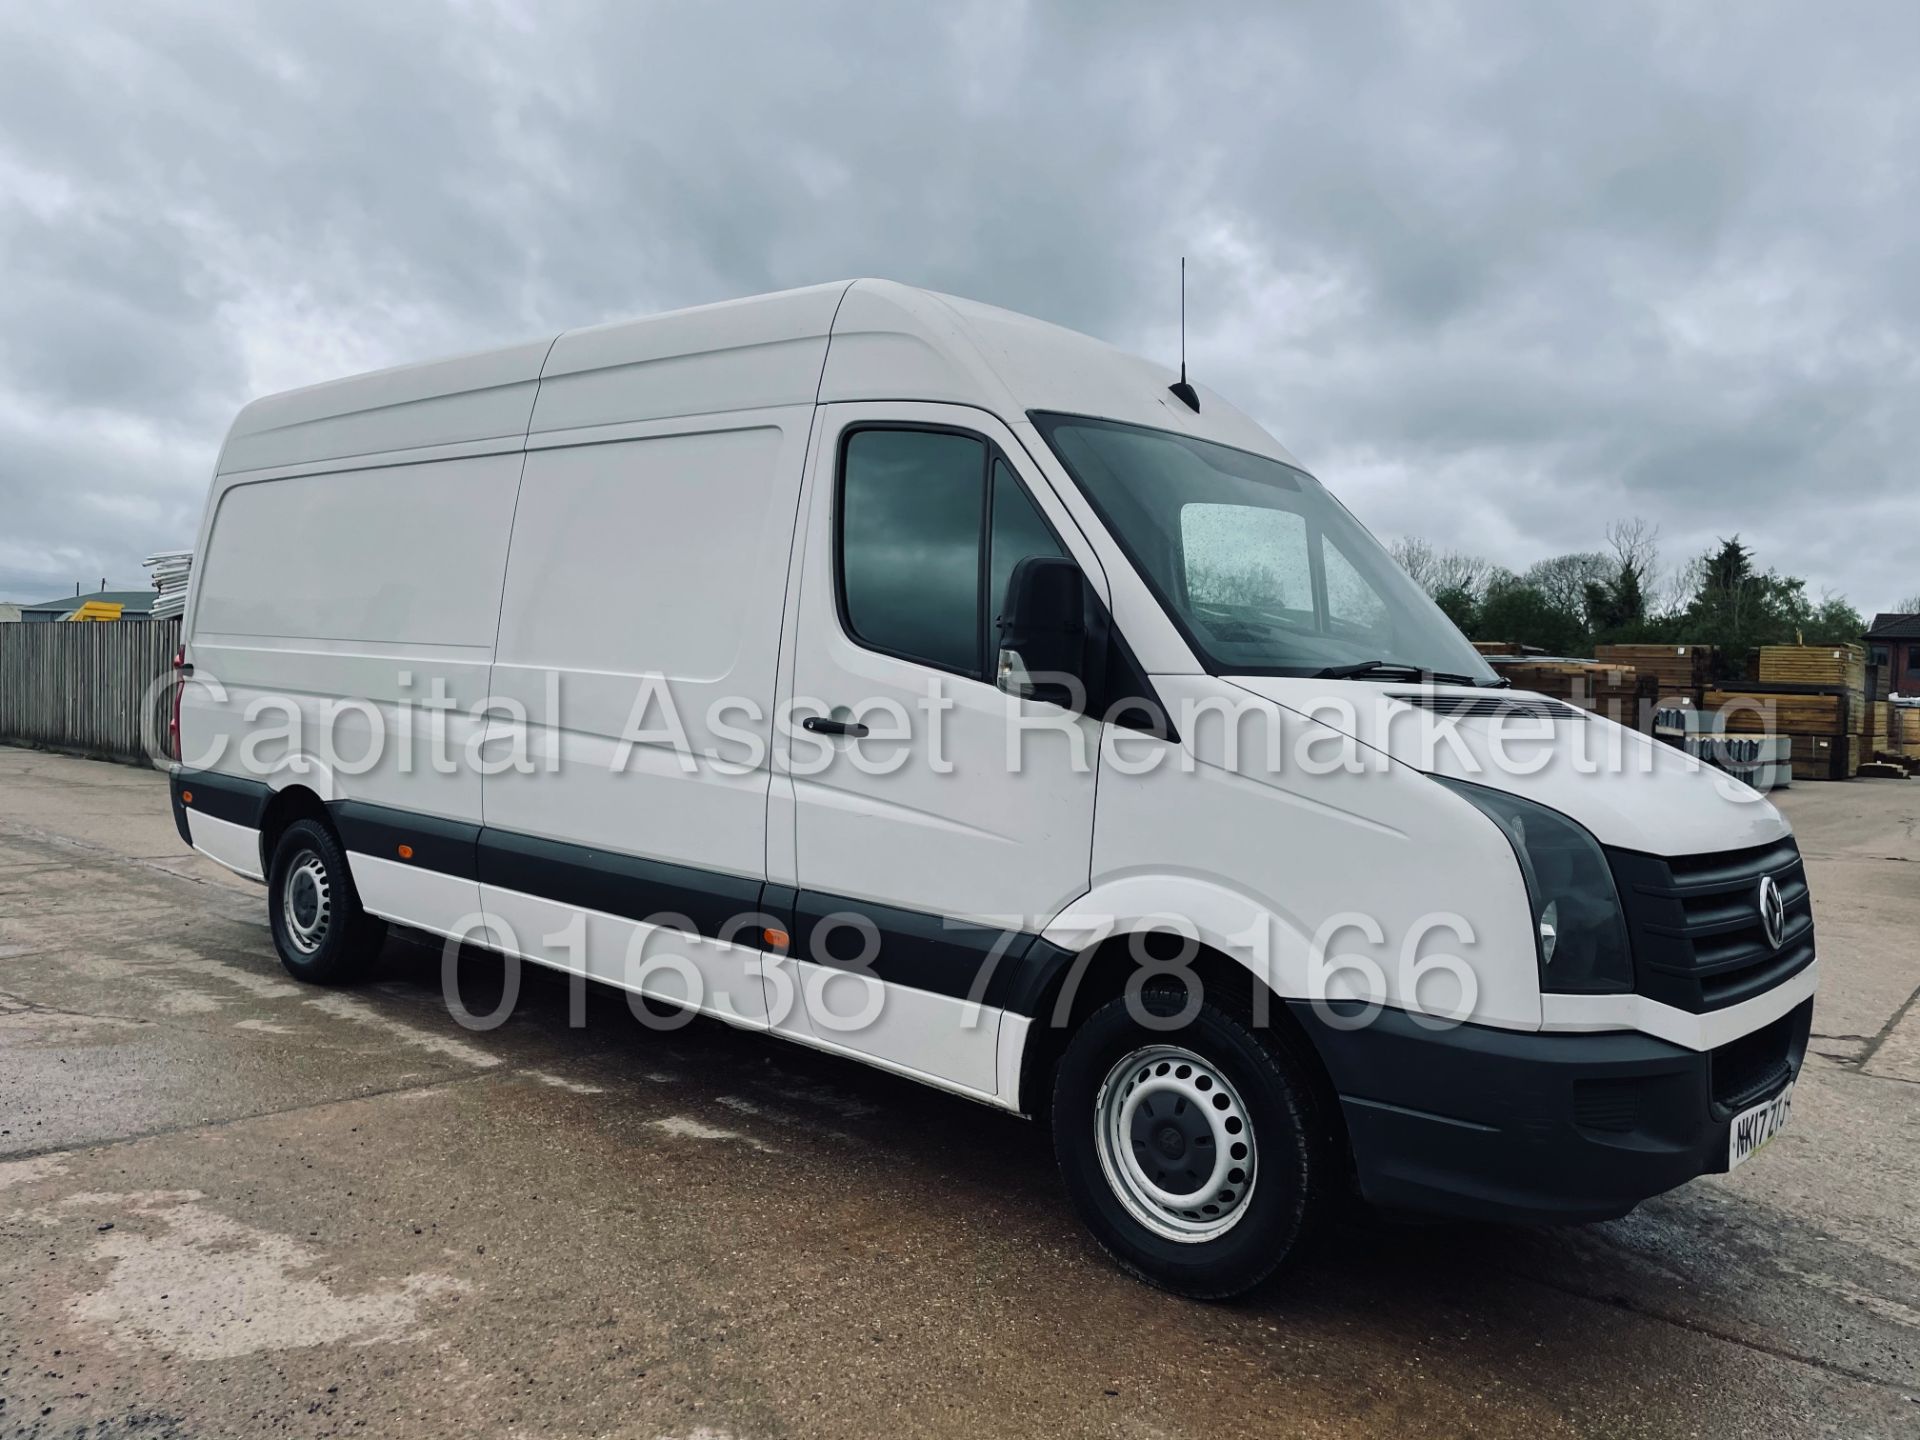 (On Sale) VOLKSWAGEN CRAFTER *LWB HI-ROOF* (2017 - EURO 6) '2.0 TDI BMT - 6 SPEED' *CRUISE CONTROL* - Image 2 of 39